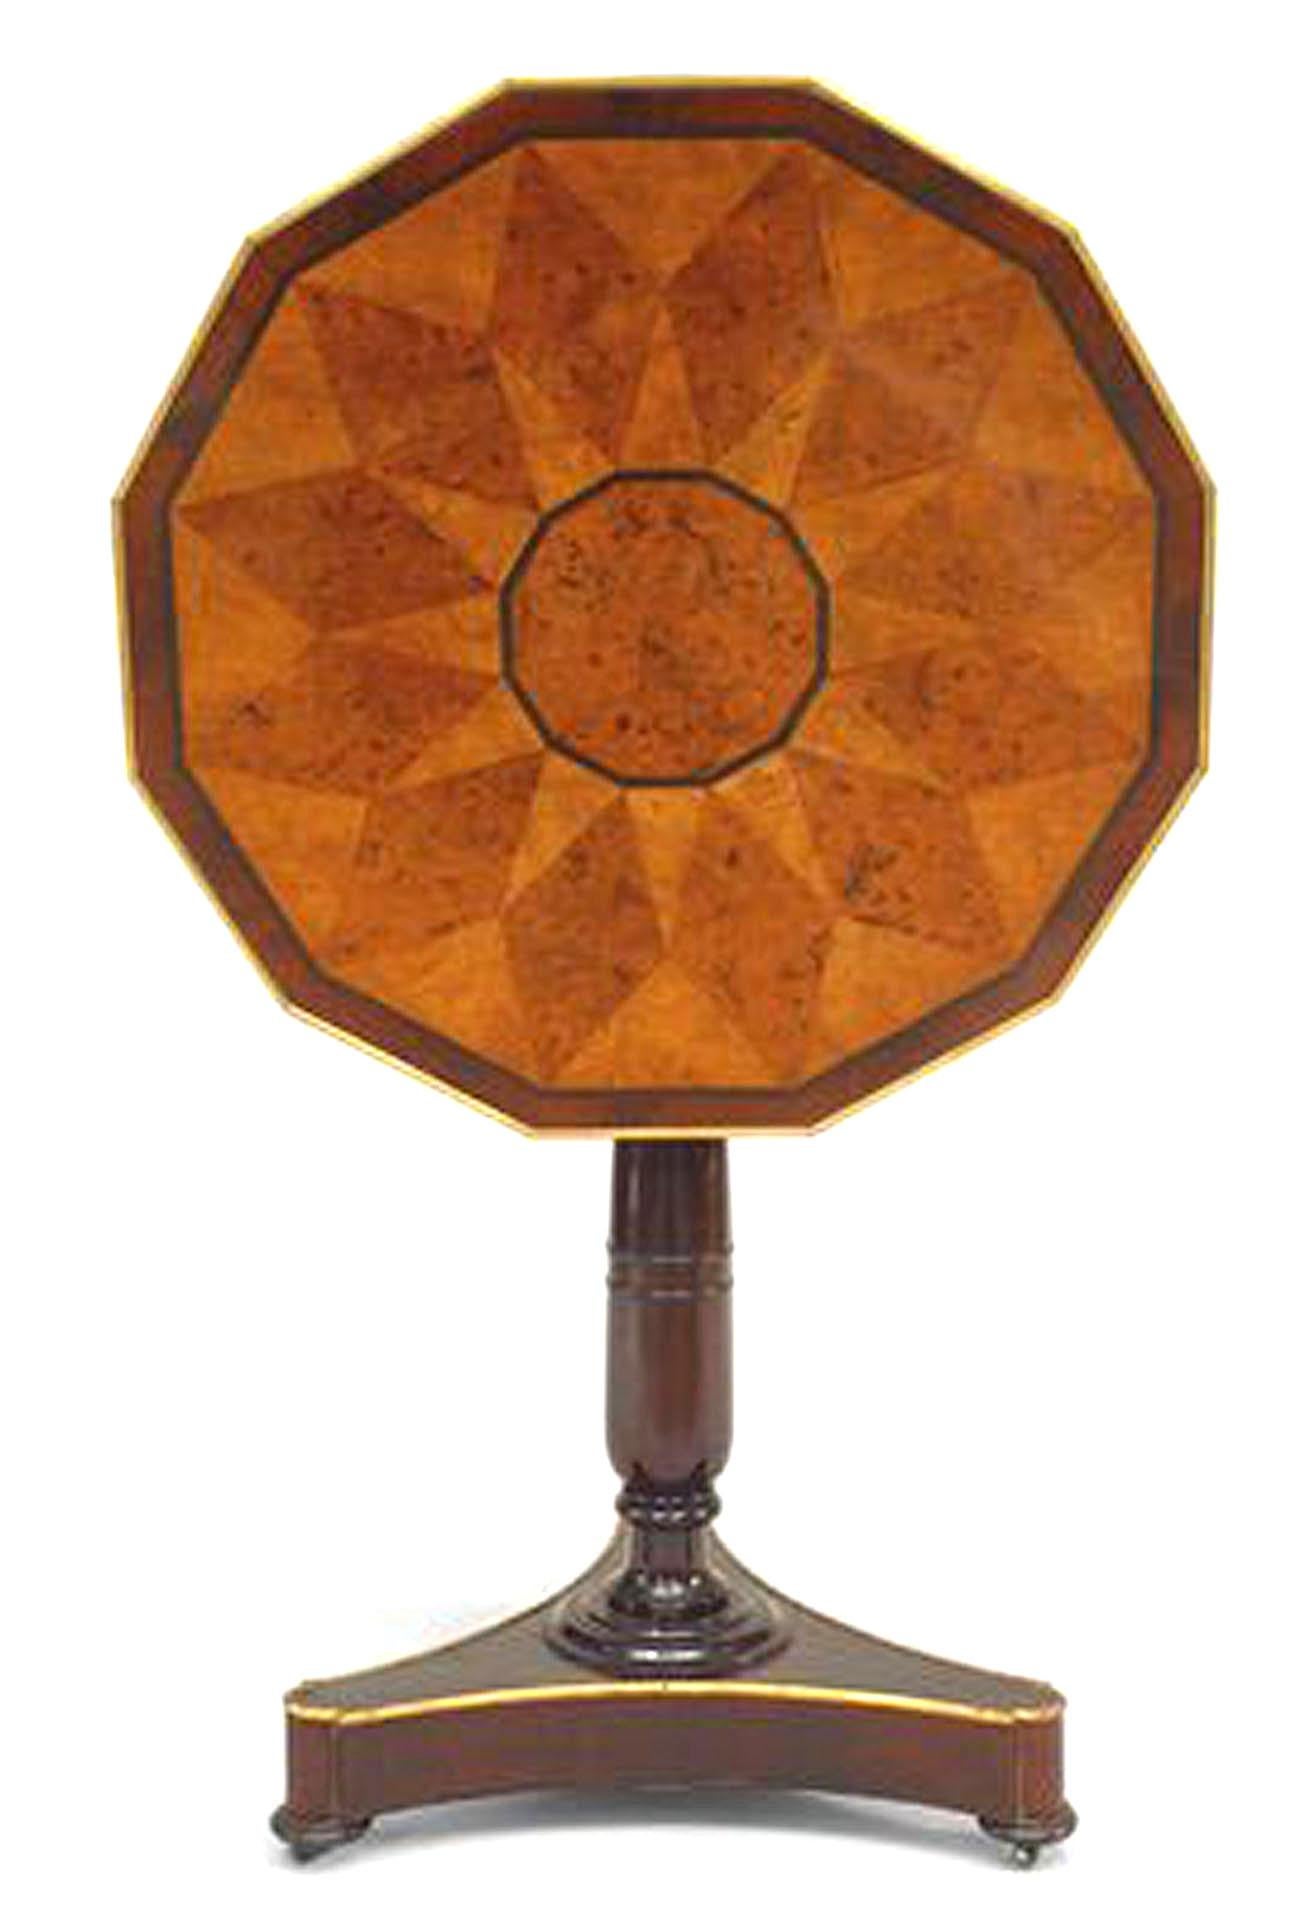 Russian Neoclassic (19th Century) brass mounted mahogany tilt-top table with 12-sided specimen wood parquetry top above an incurved tripartite base
